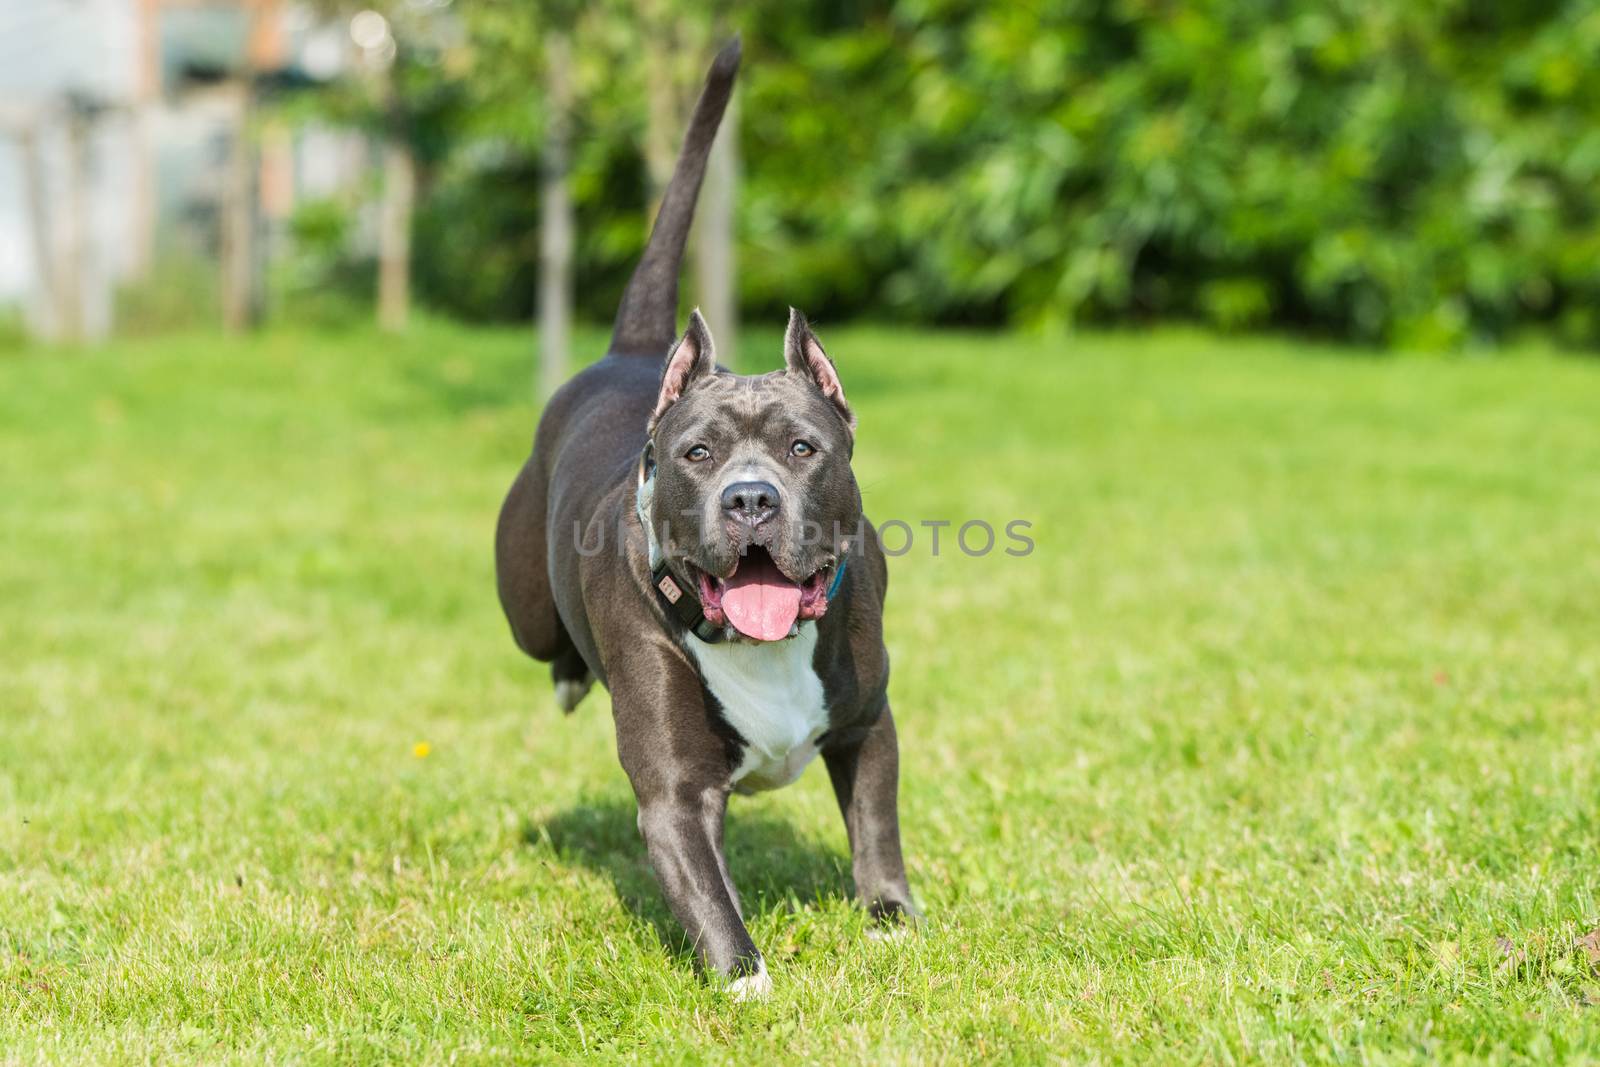 Blue brindle American Staffordshire Terrier dog or AmStaff is running on nature